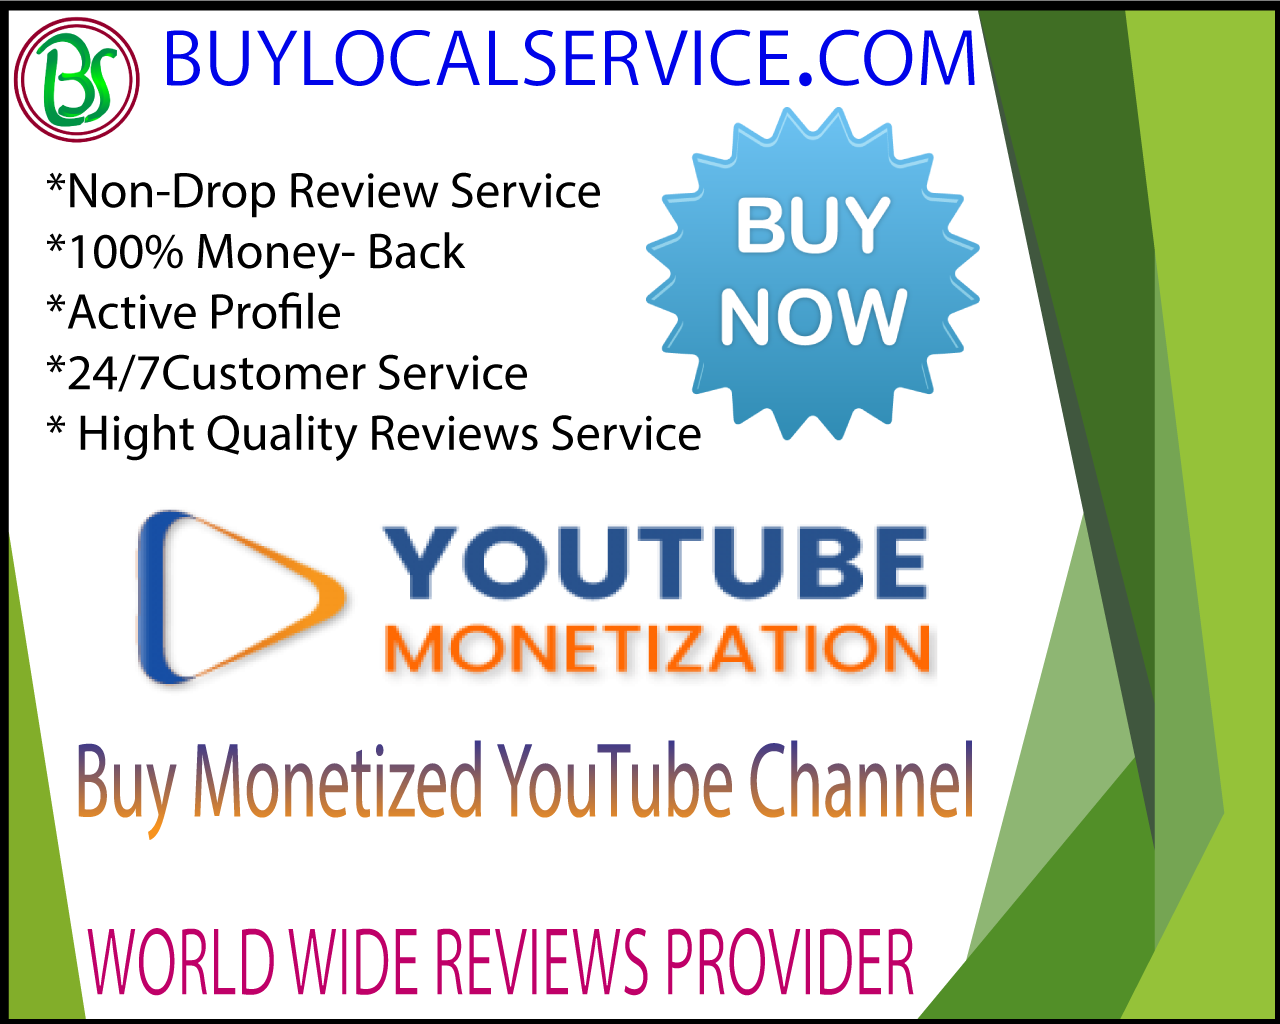 Buy Monetized YouTube Channel - 100%Verified With Monetized